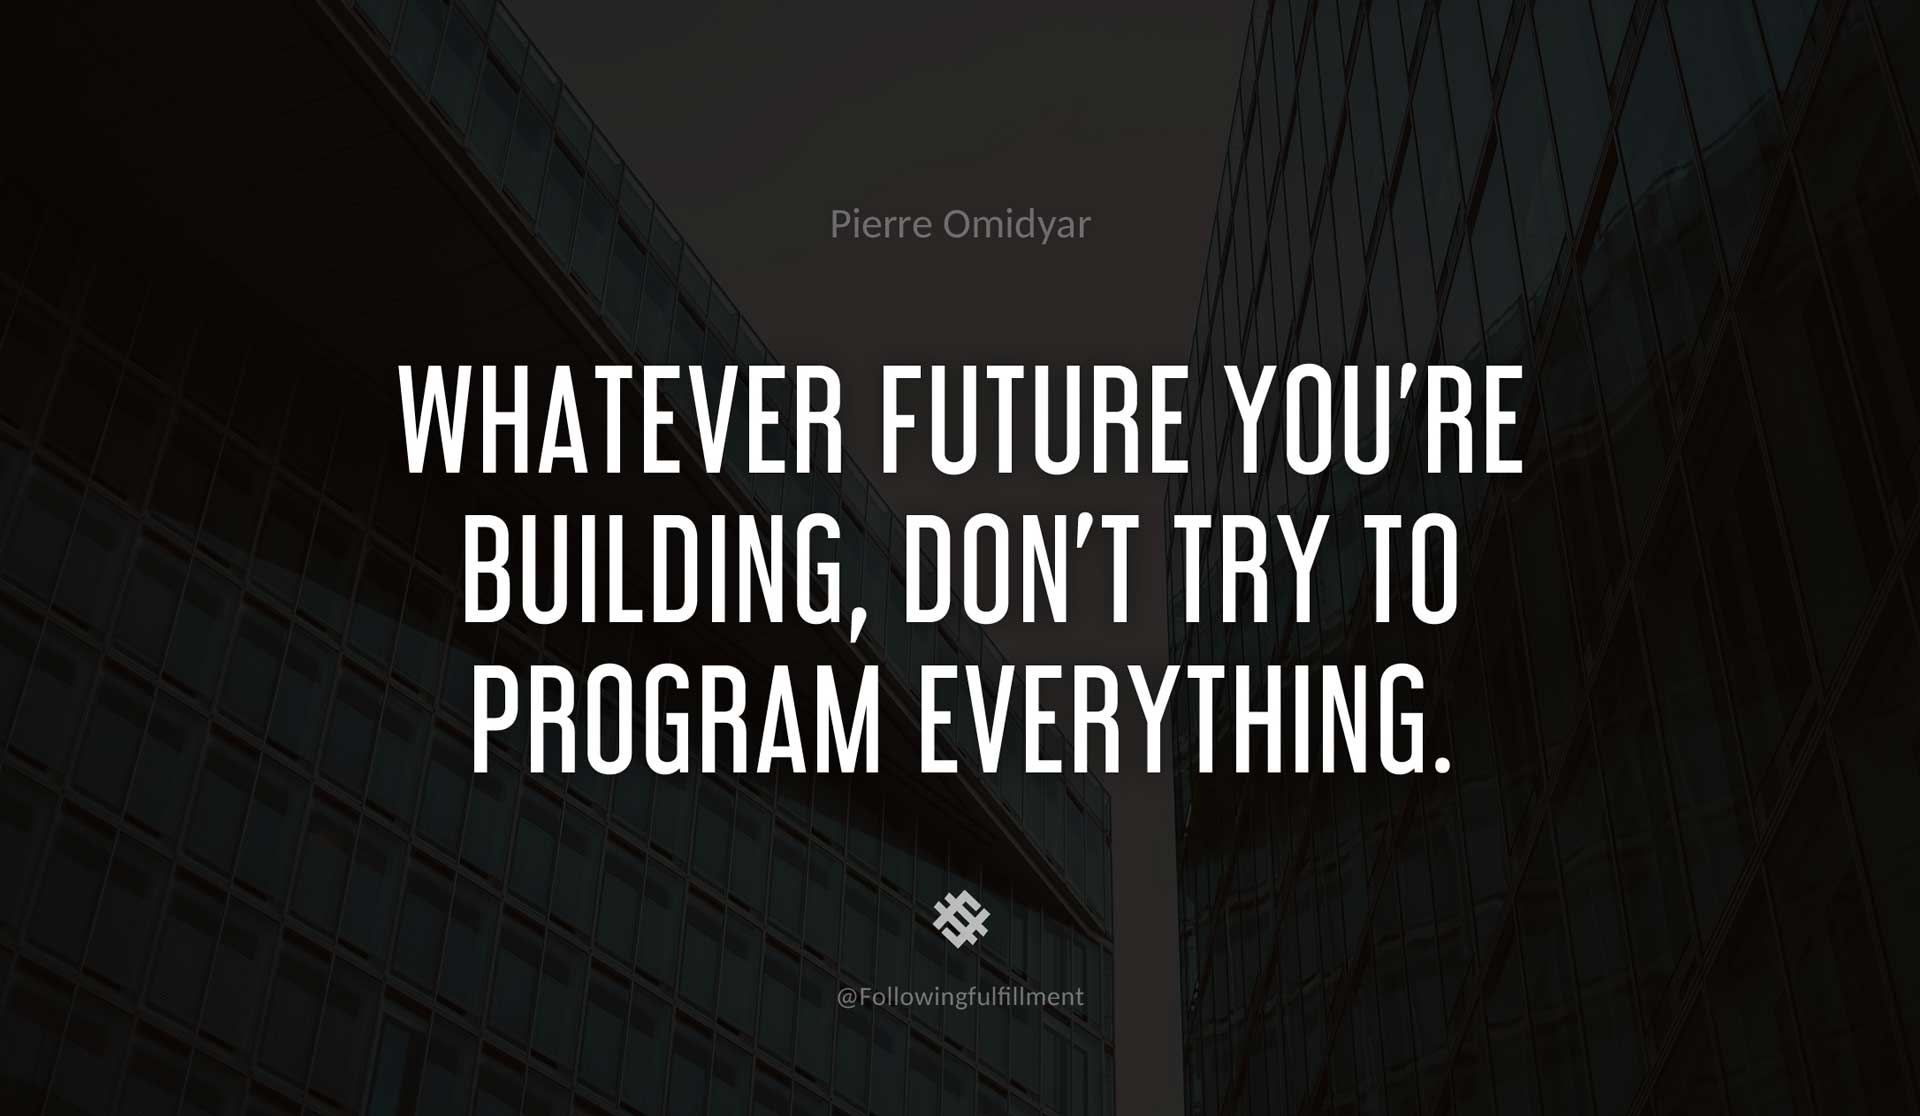 Whatever-future-you're-building,-don't-try-to-program-everything.-PIERRE-OMIDYAR-Quote.jpg